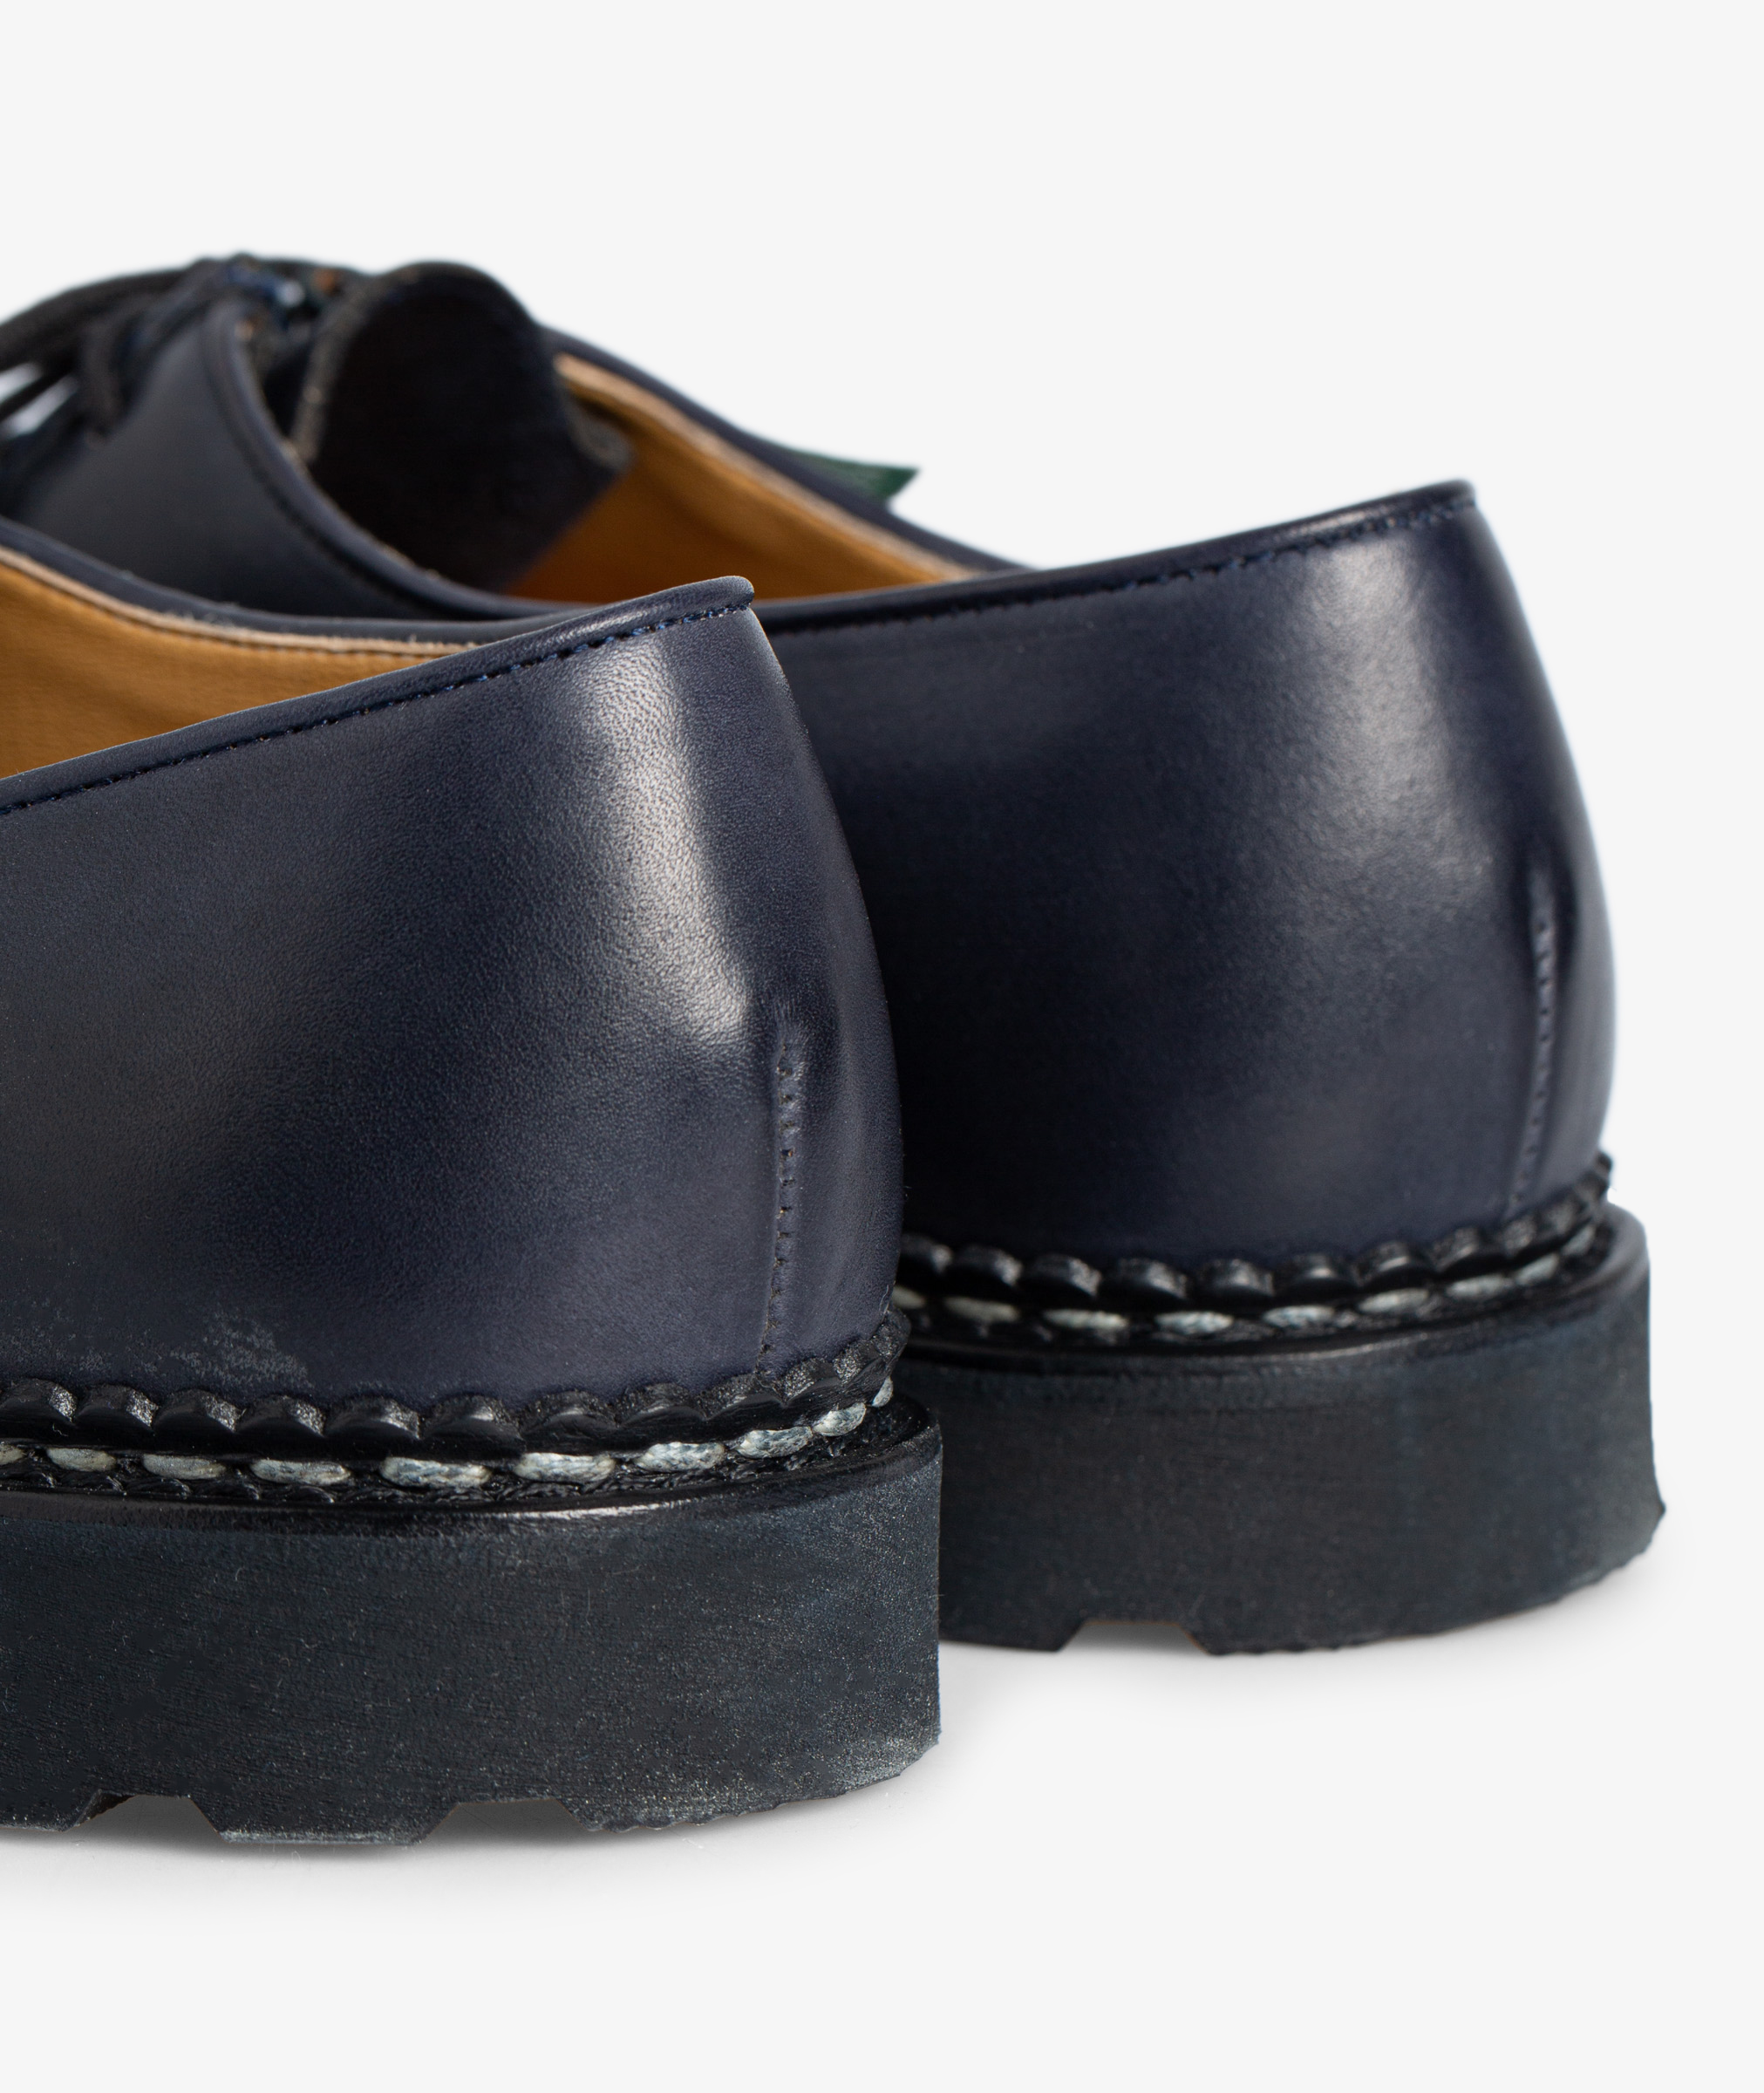 Norse Store | Shipping Worldwide - Shoes - Paraboot - Michael